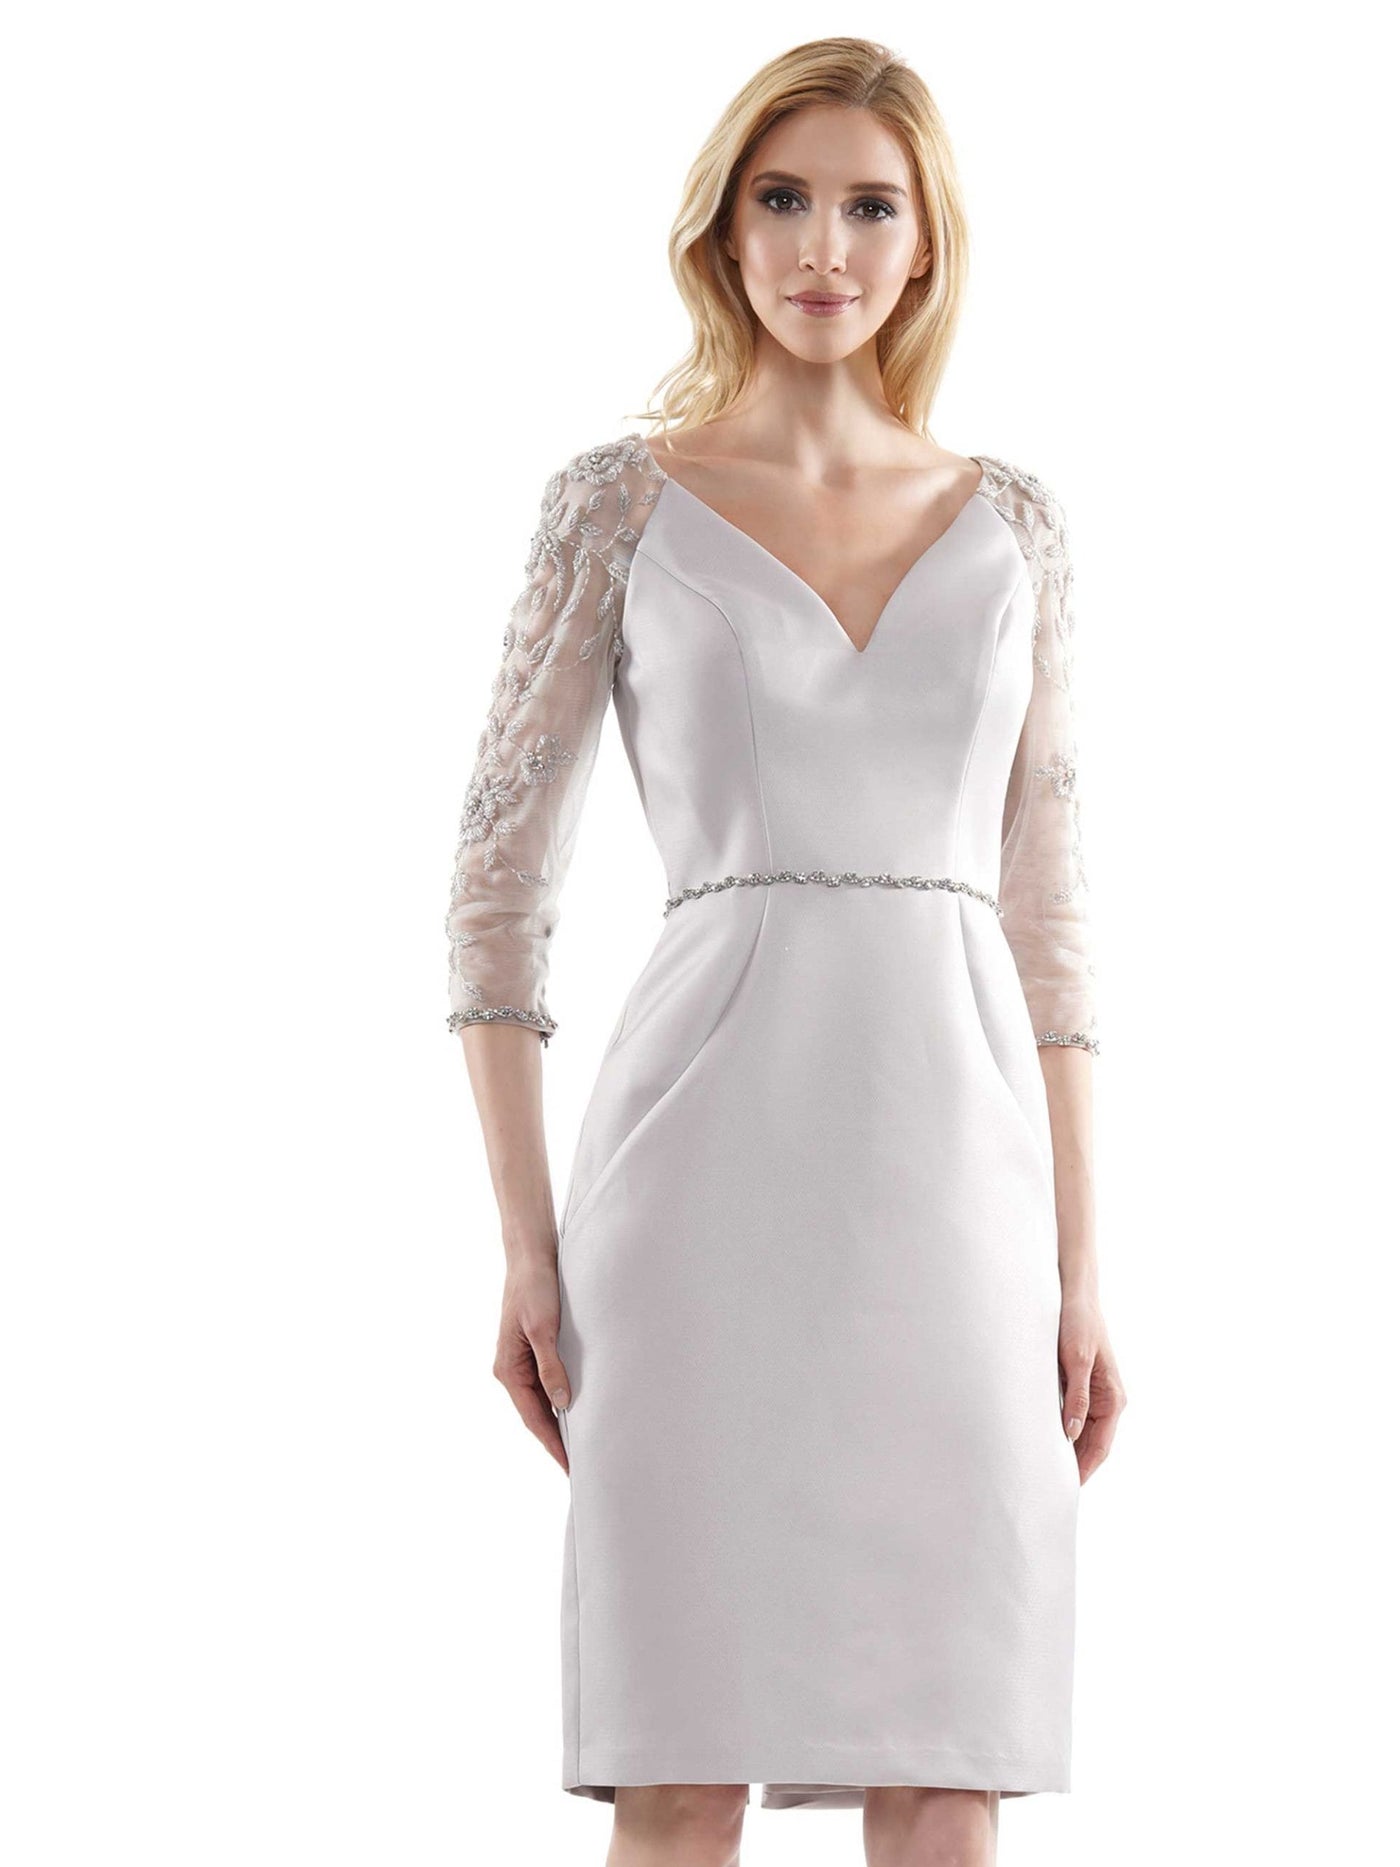 Marsoni by Colors - MV1061 V-Neck Illusion Cocktail Dress Wedding Guest 4 / Taupe